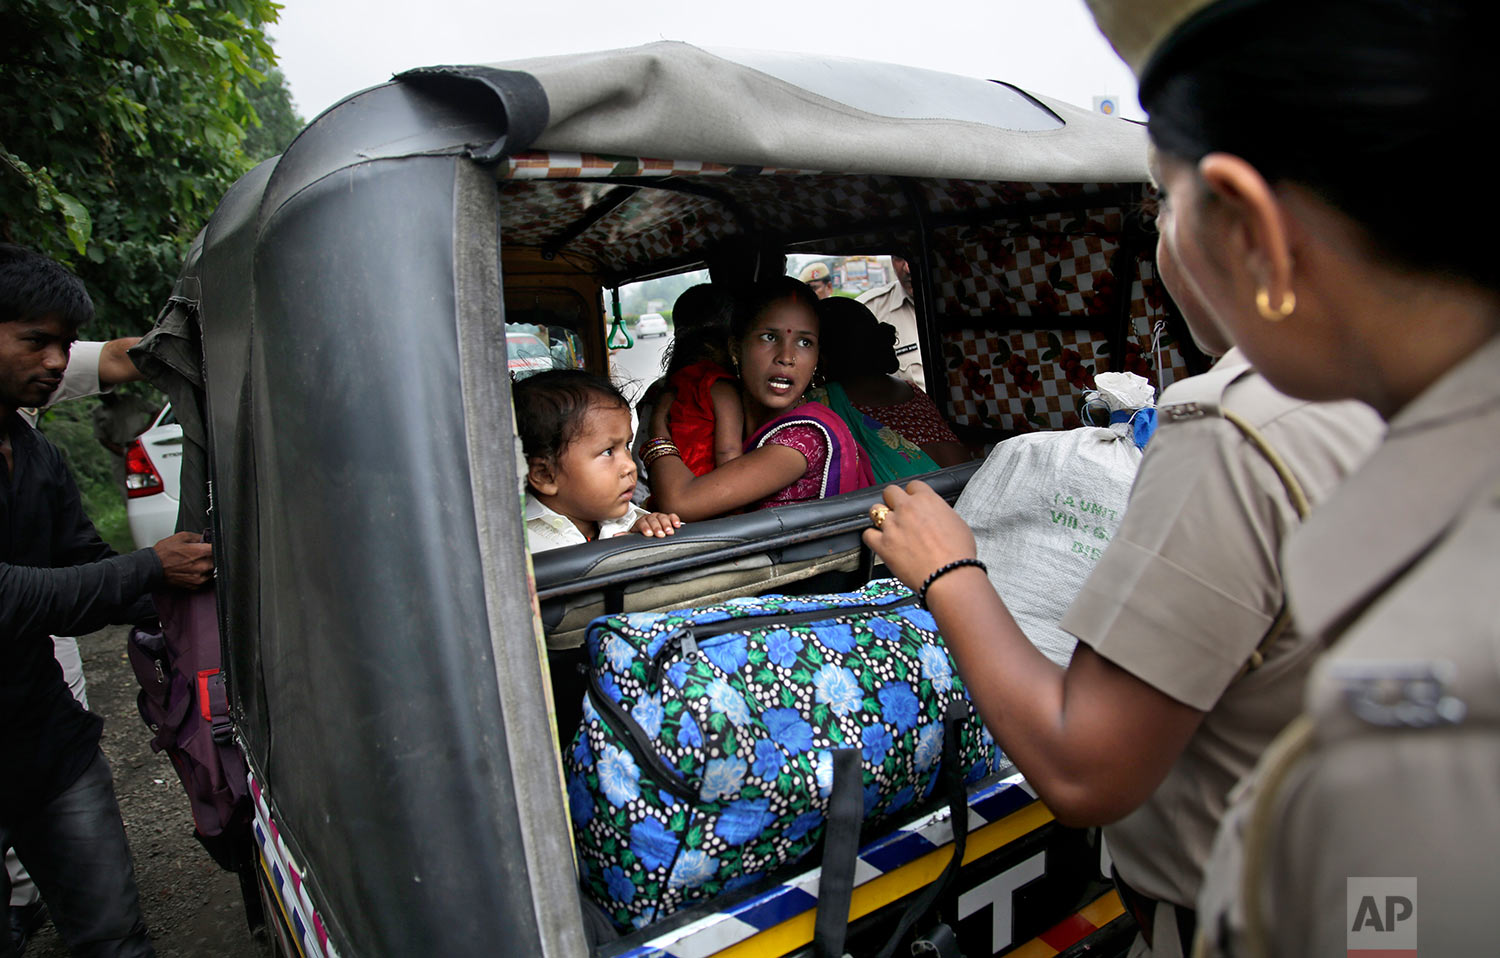  Indian policewomen question a woman passenger in an auto rickshaw as they check for supporters of the Dera Sacha Sauda sect near Panchkula, India, Thursday, Aug. 24, 2017. (AP Photo/Altaf Qadri) 